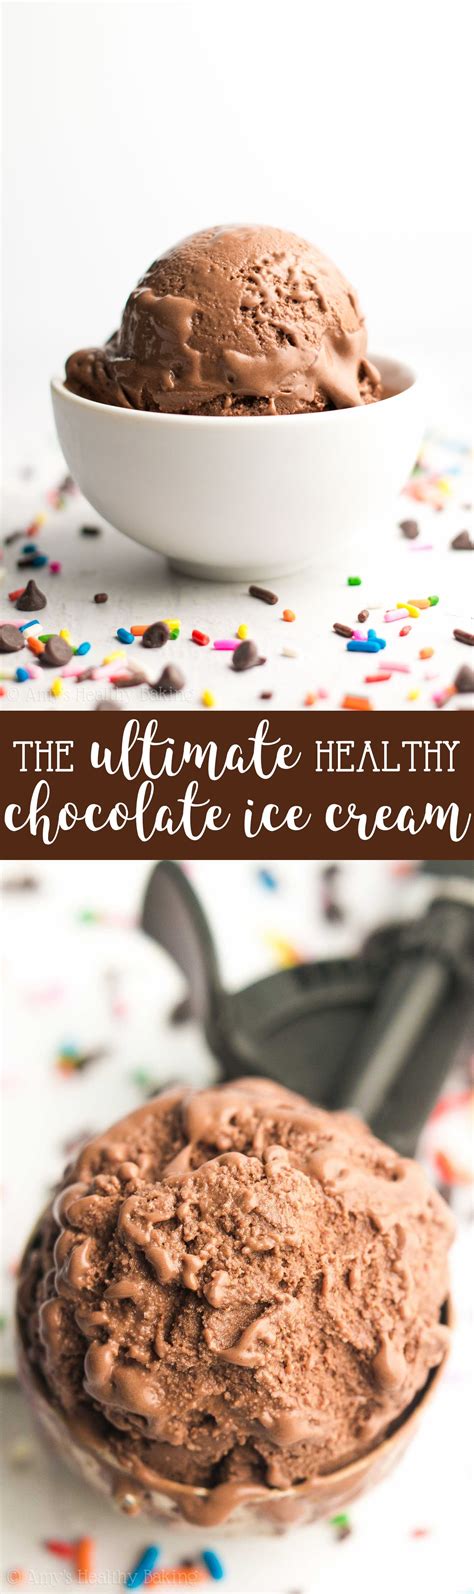 Here's how simple this low calorie protein ice cream recipe is. The ULTIMATE Healthy Chocolate Ice Cream -- just 85 ...